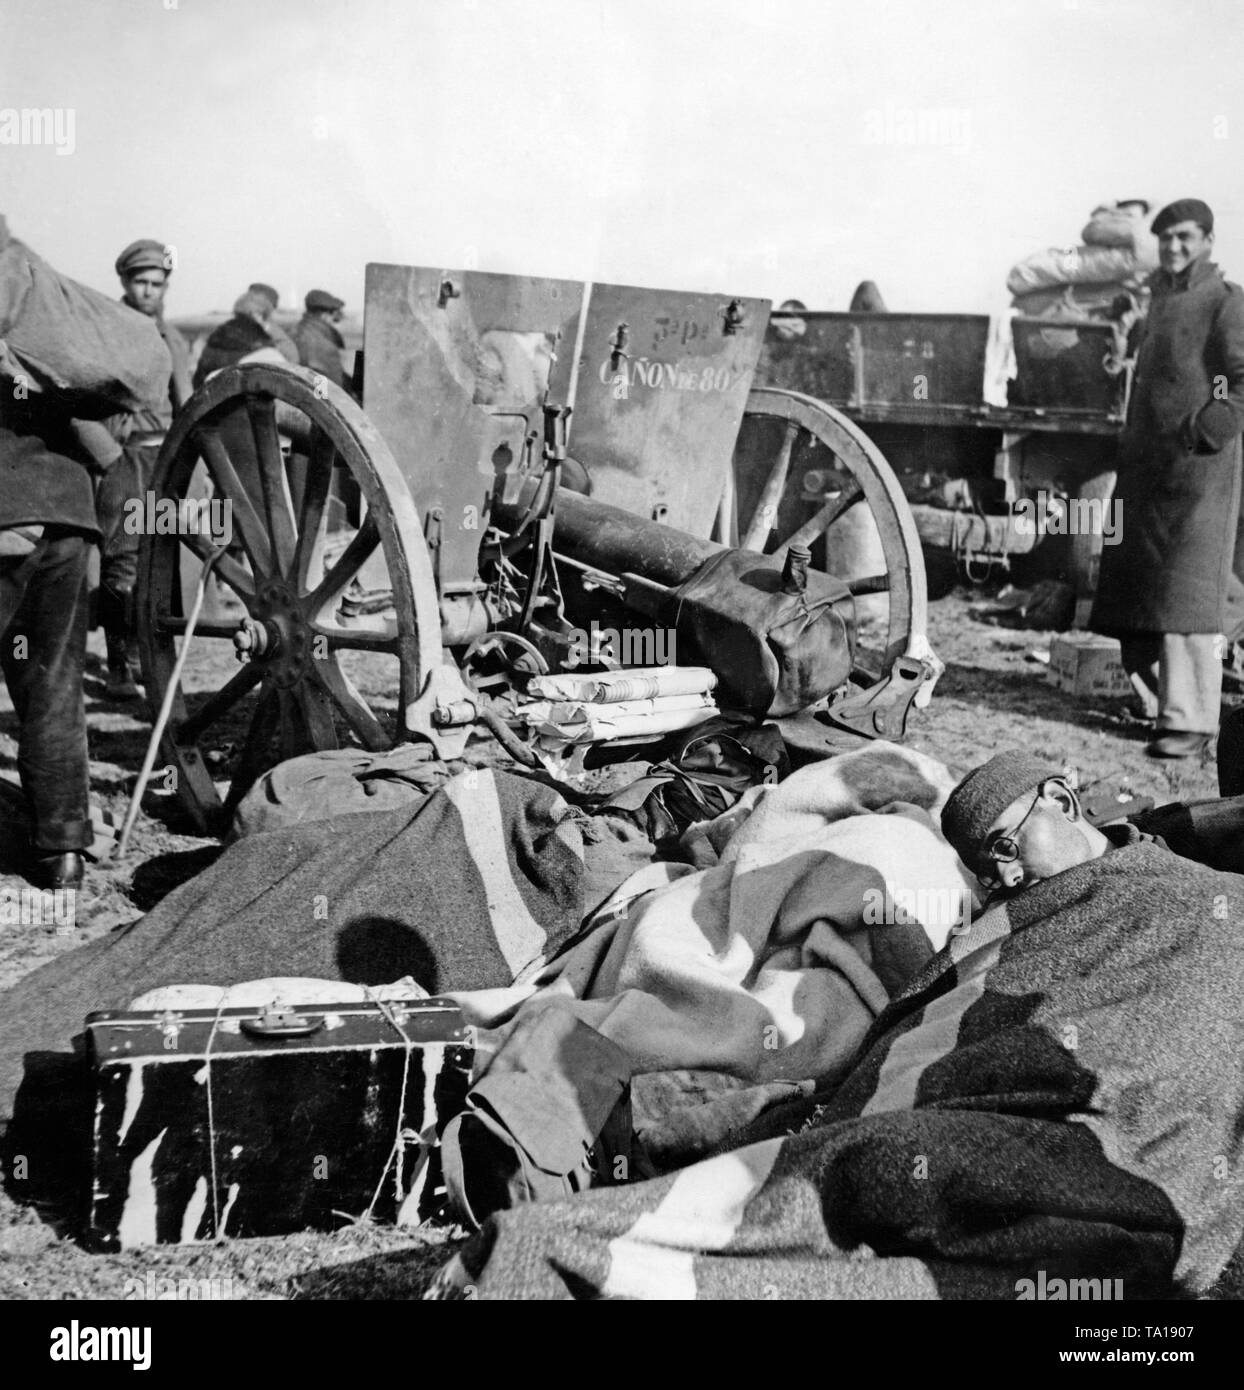 A group of Republican fighters camping behind the frontier. In the foreground a man is sleepign, behind are further refugees and guns. Stock Photo